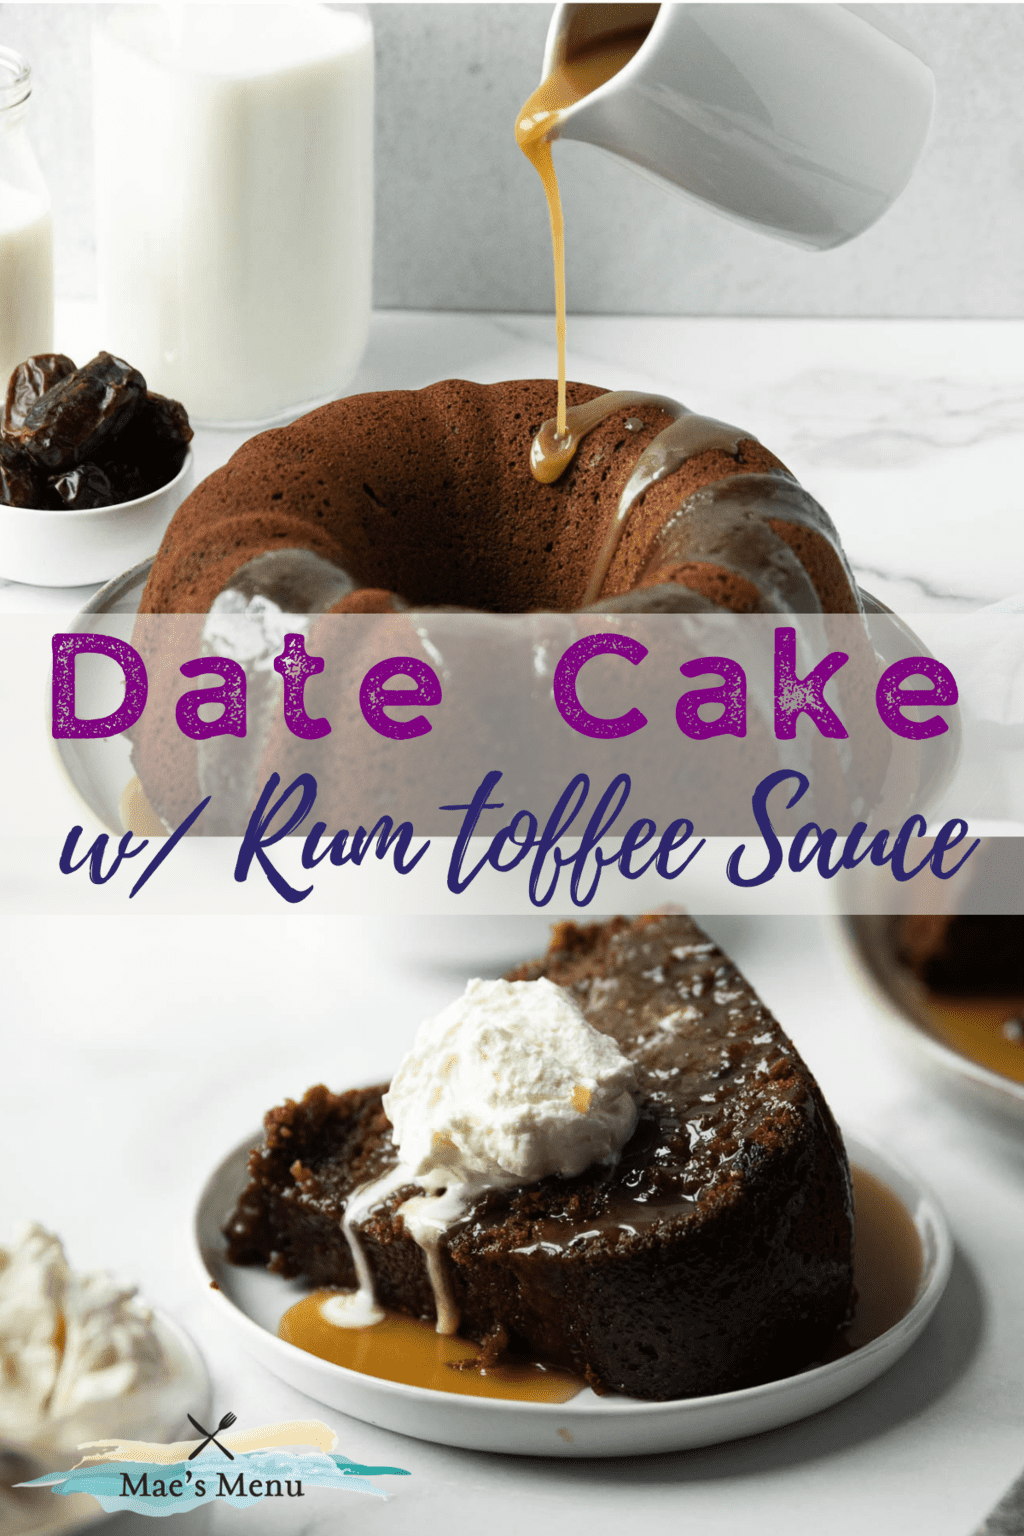 A pinterest pin for Date Cake with Rum Toffee Sauce.